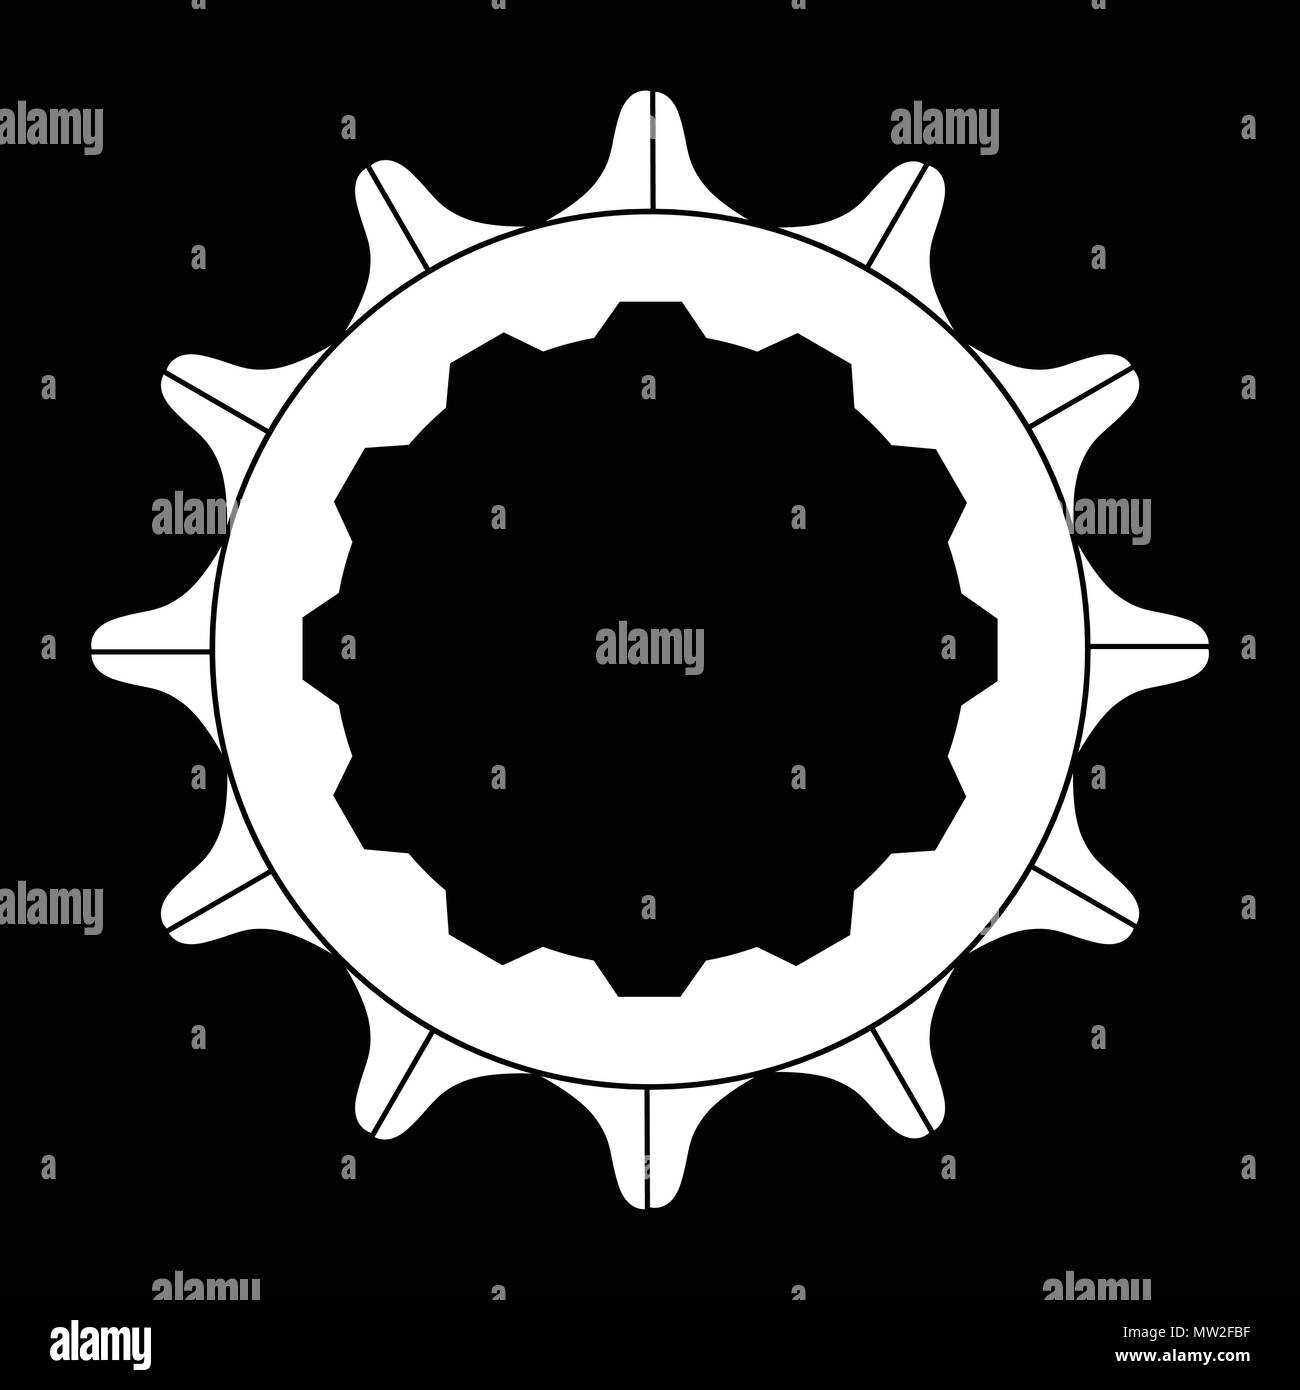 The rear driven cog of a bicycle over a black background Stock Vector